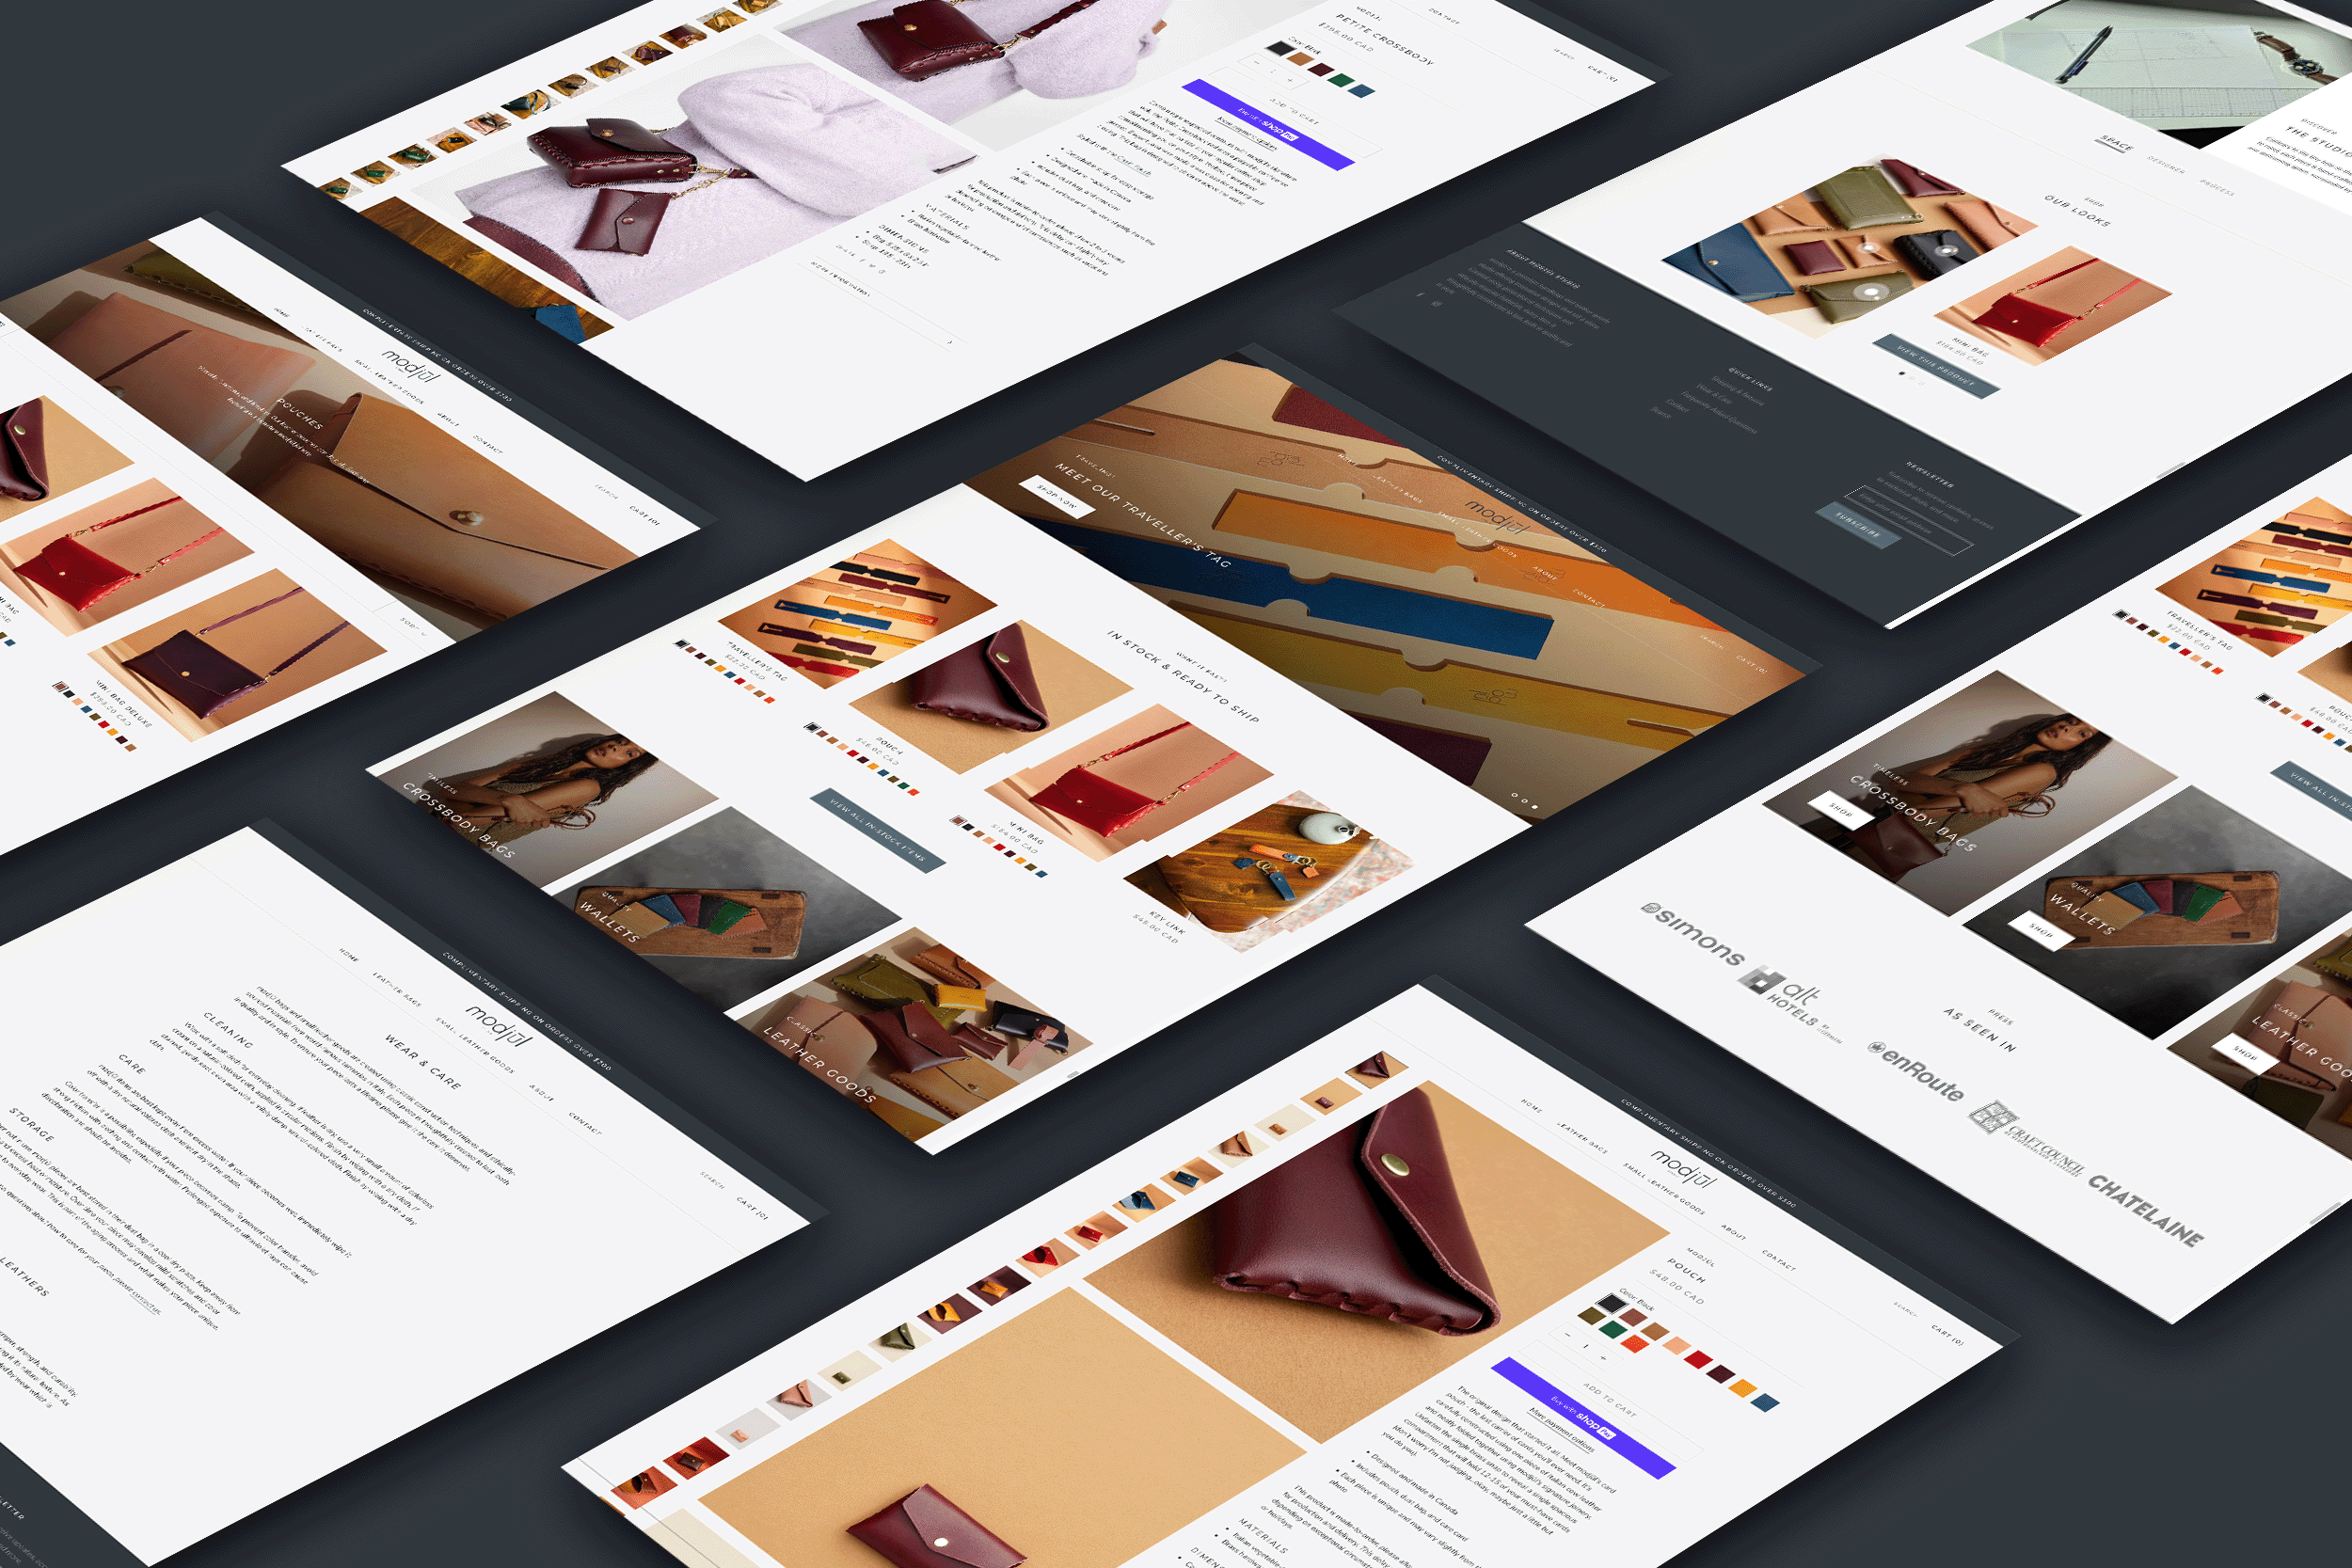 A number of mockups displaying different pages on the modjūl website.